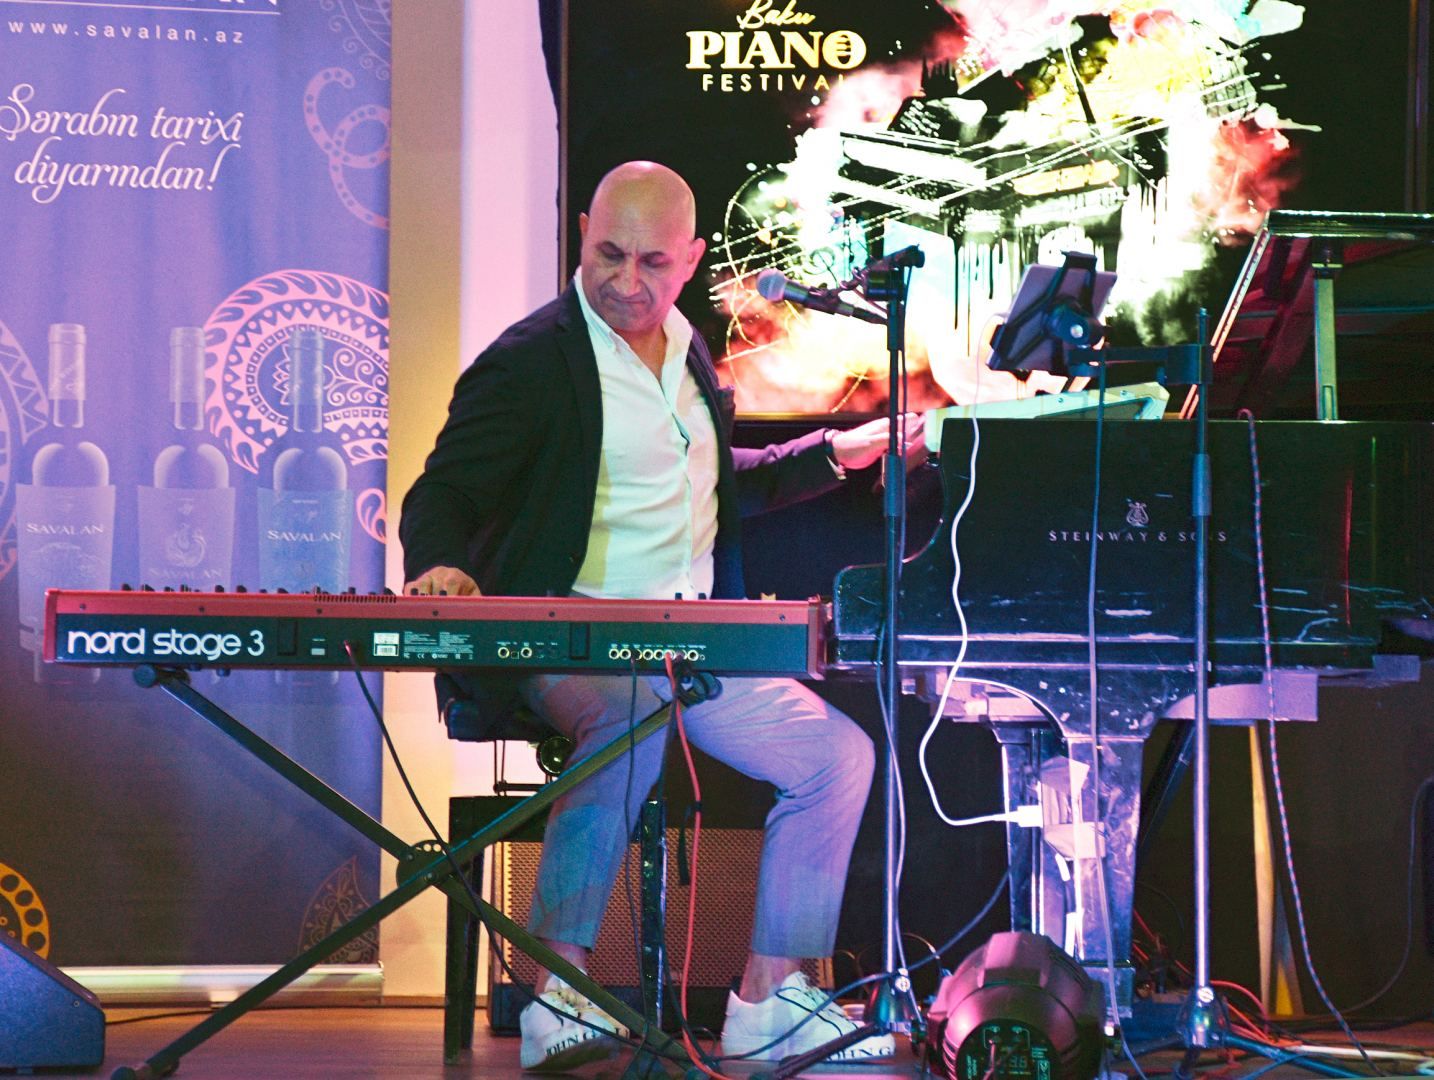 Famous pianist fascinates audience with jazz improvisations [PHOTO/VIDEO] - Gallery Image